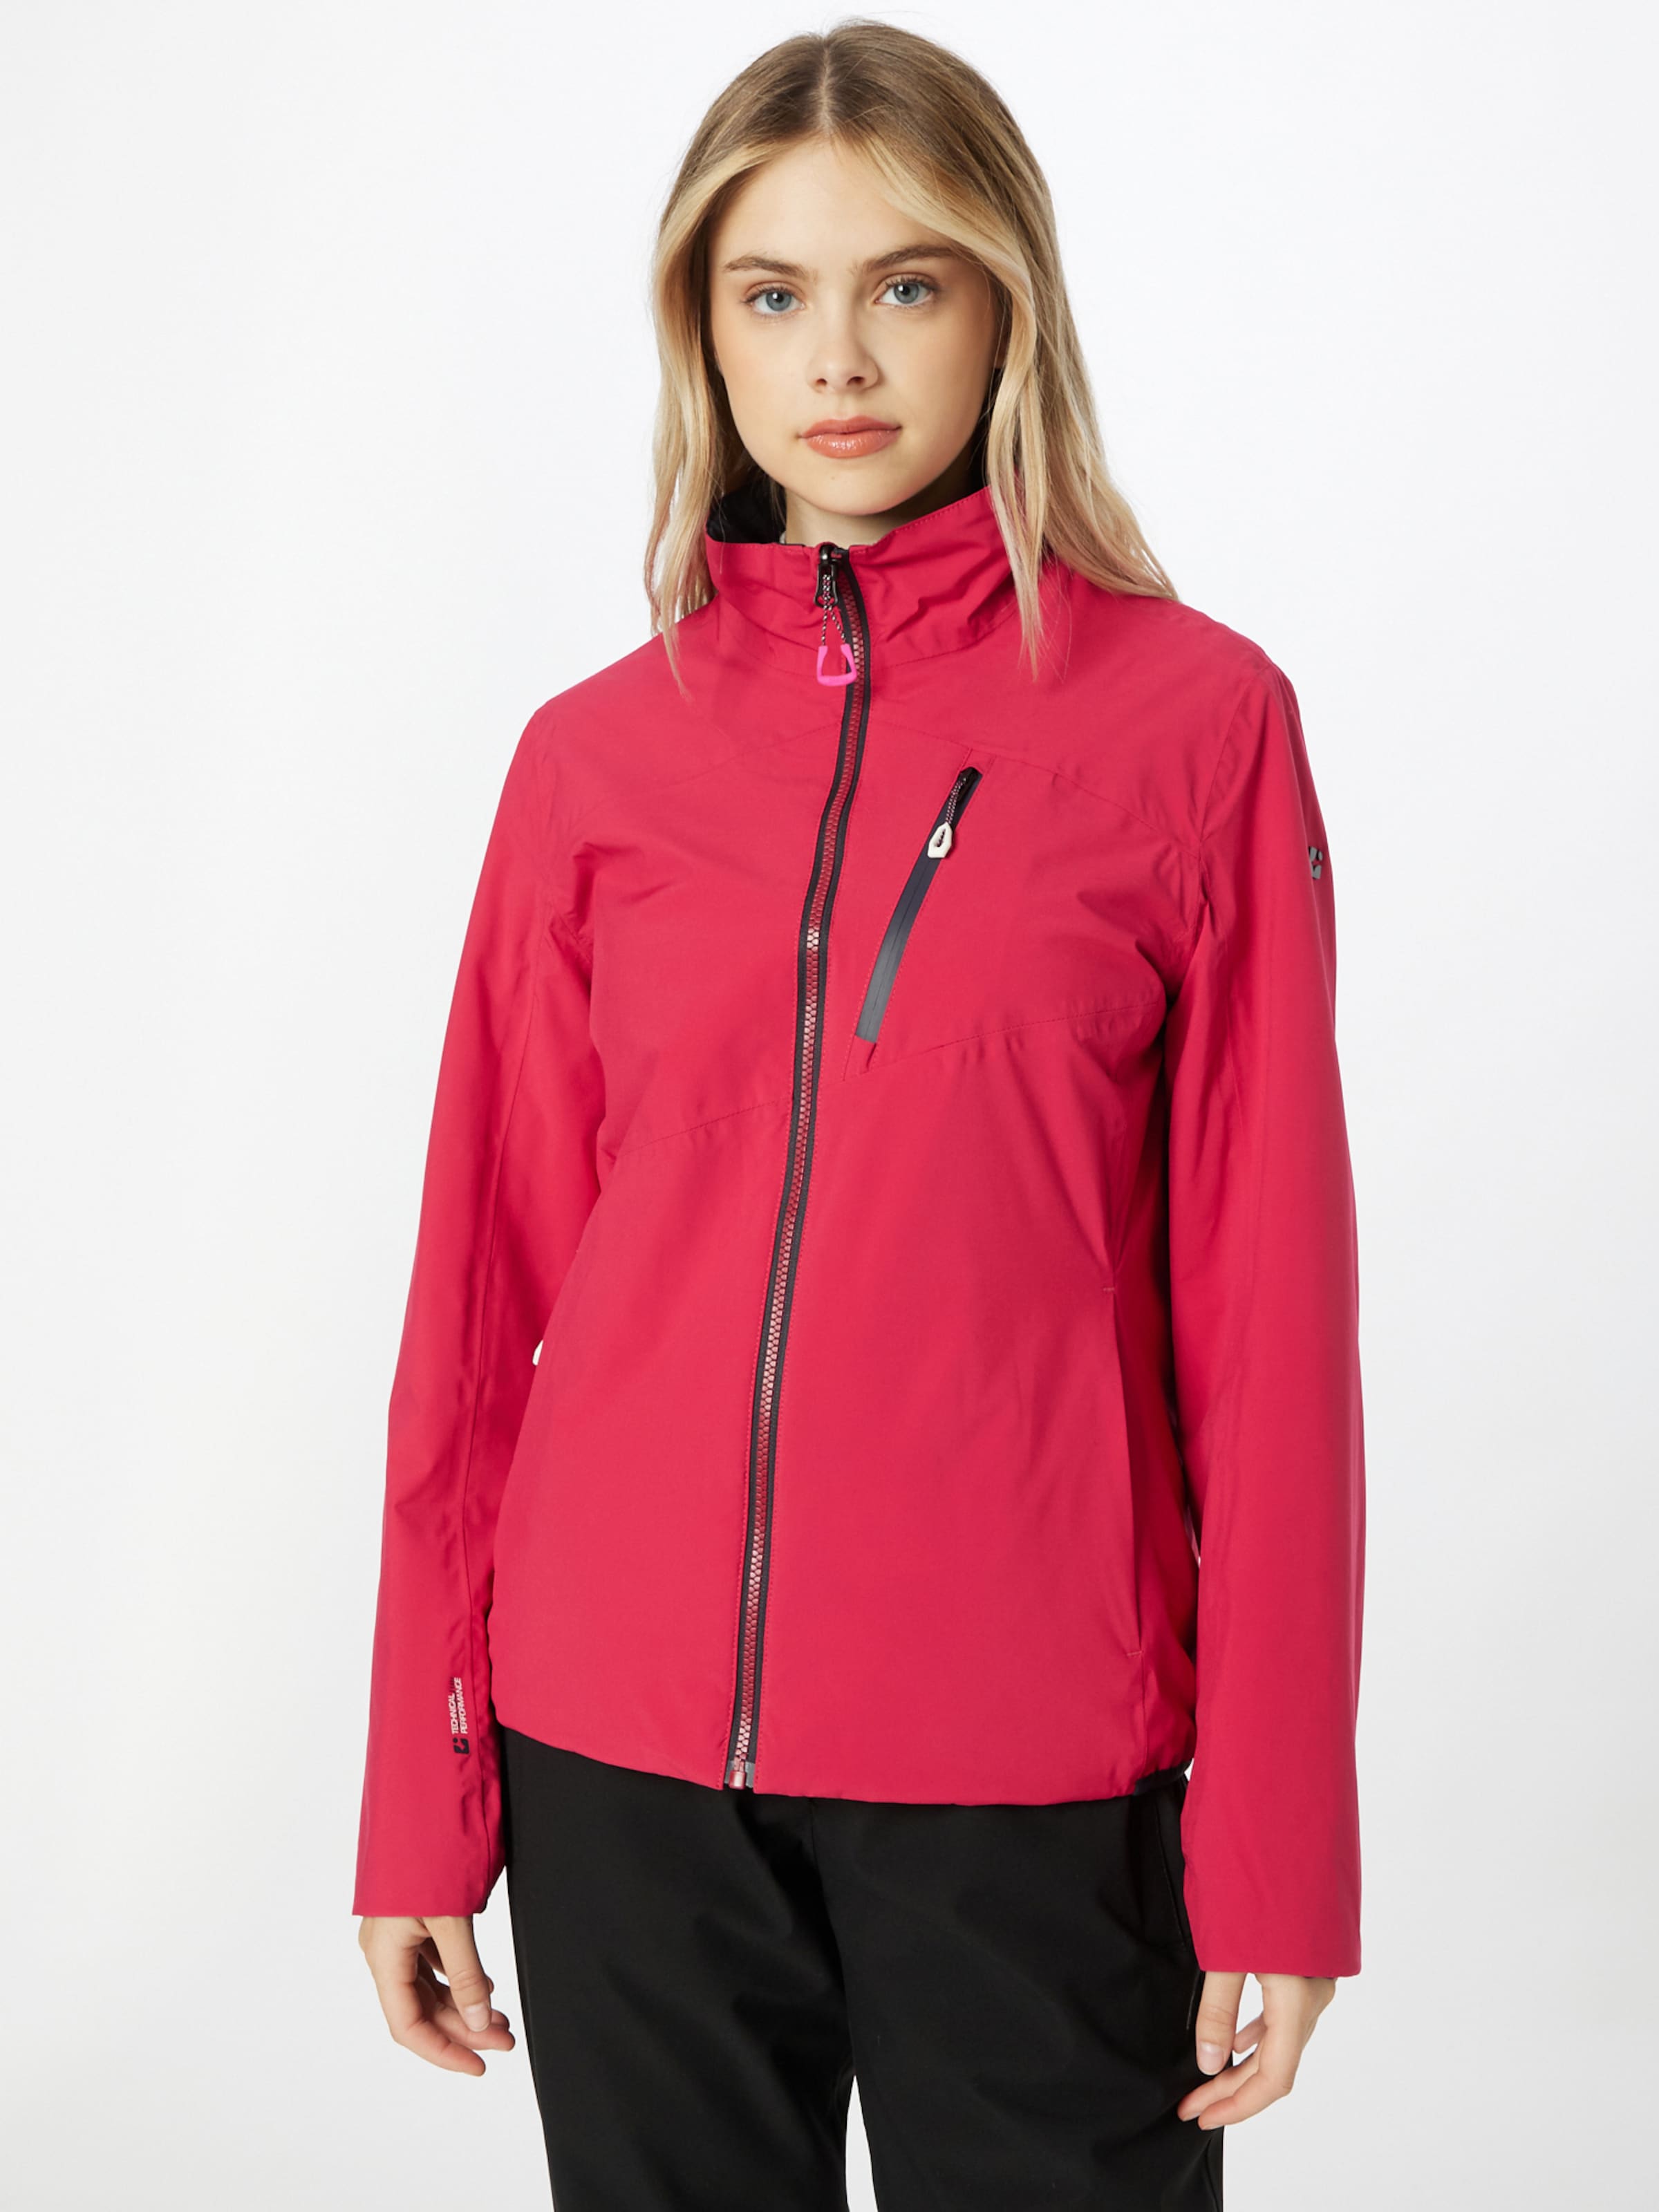 Jacket Navy, | Red KILLTEC \'KOW\' YOU Outdoor Bright in ABOUT